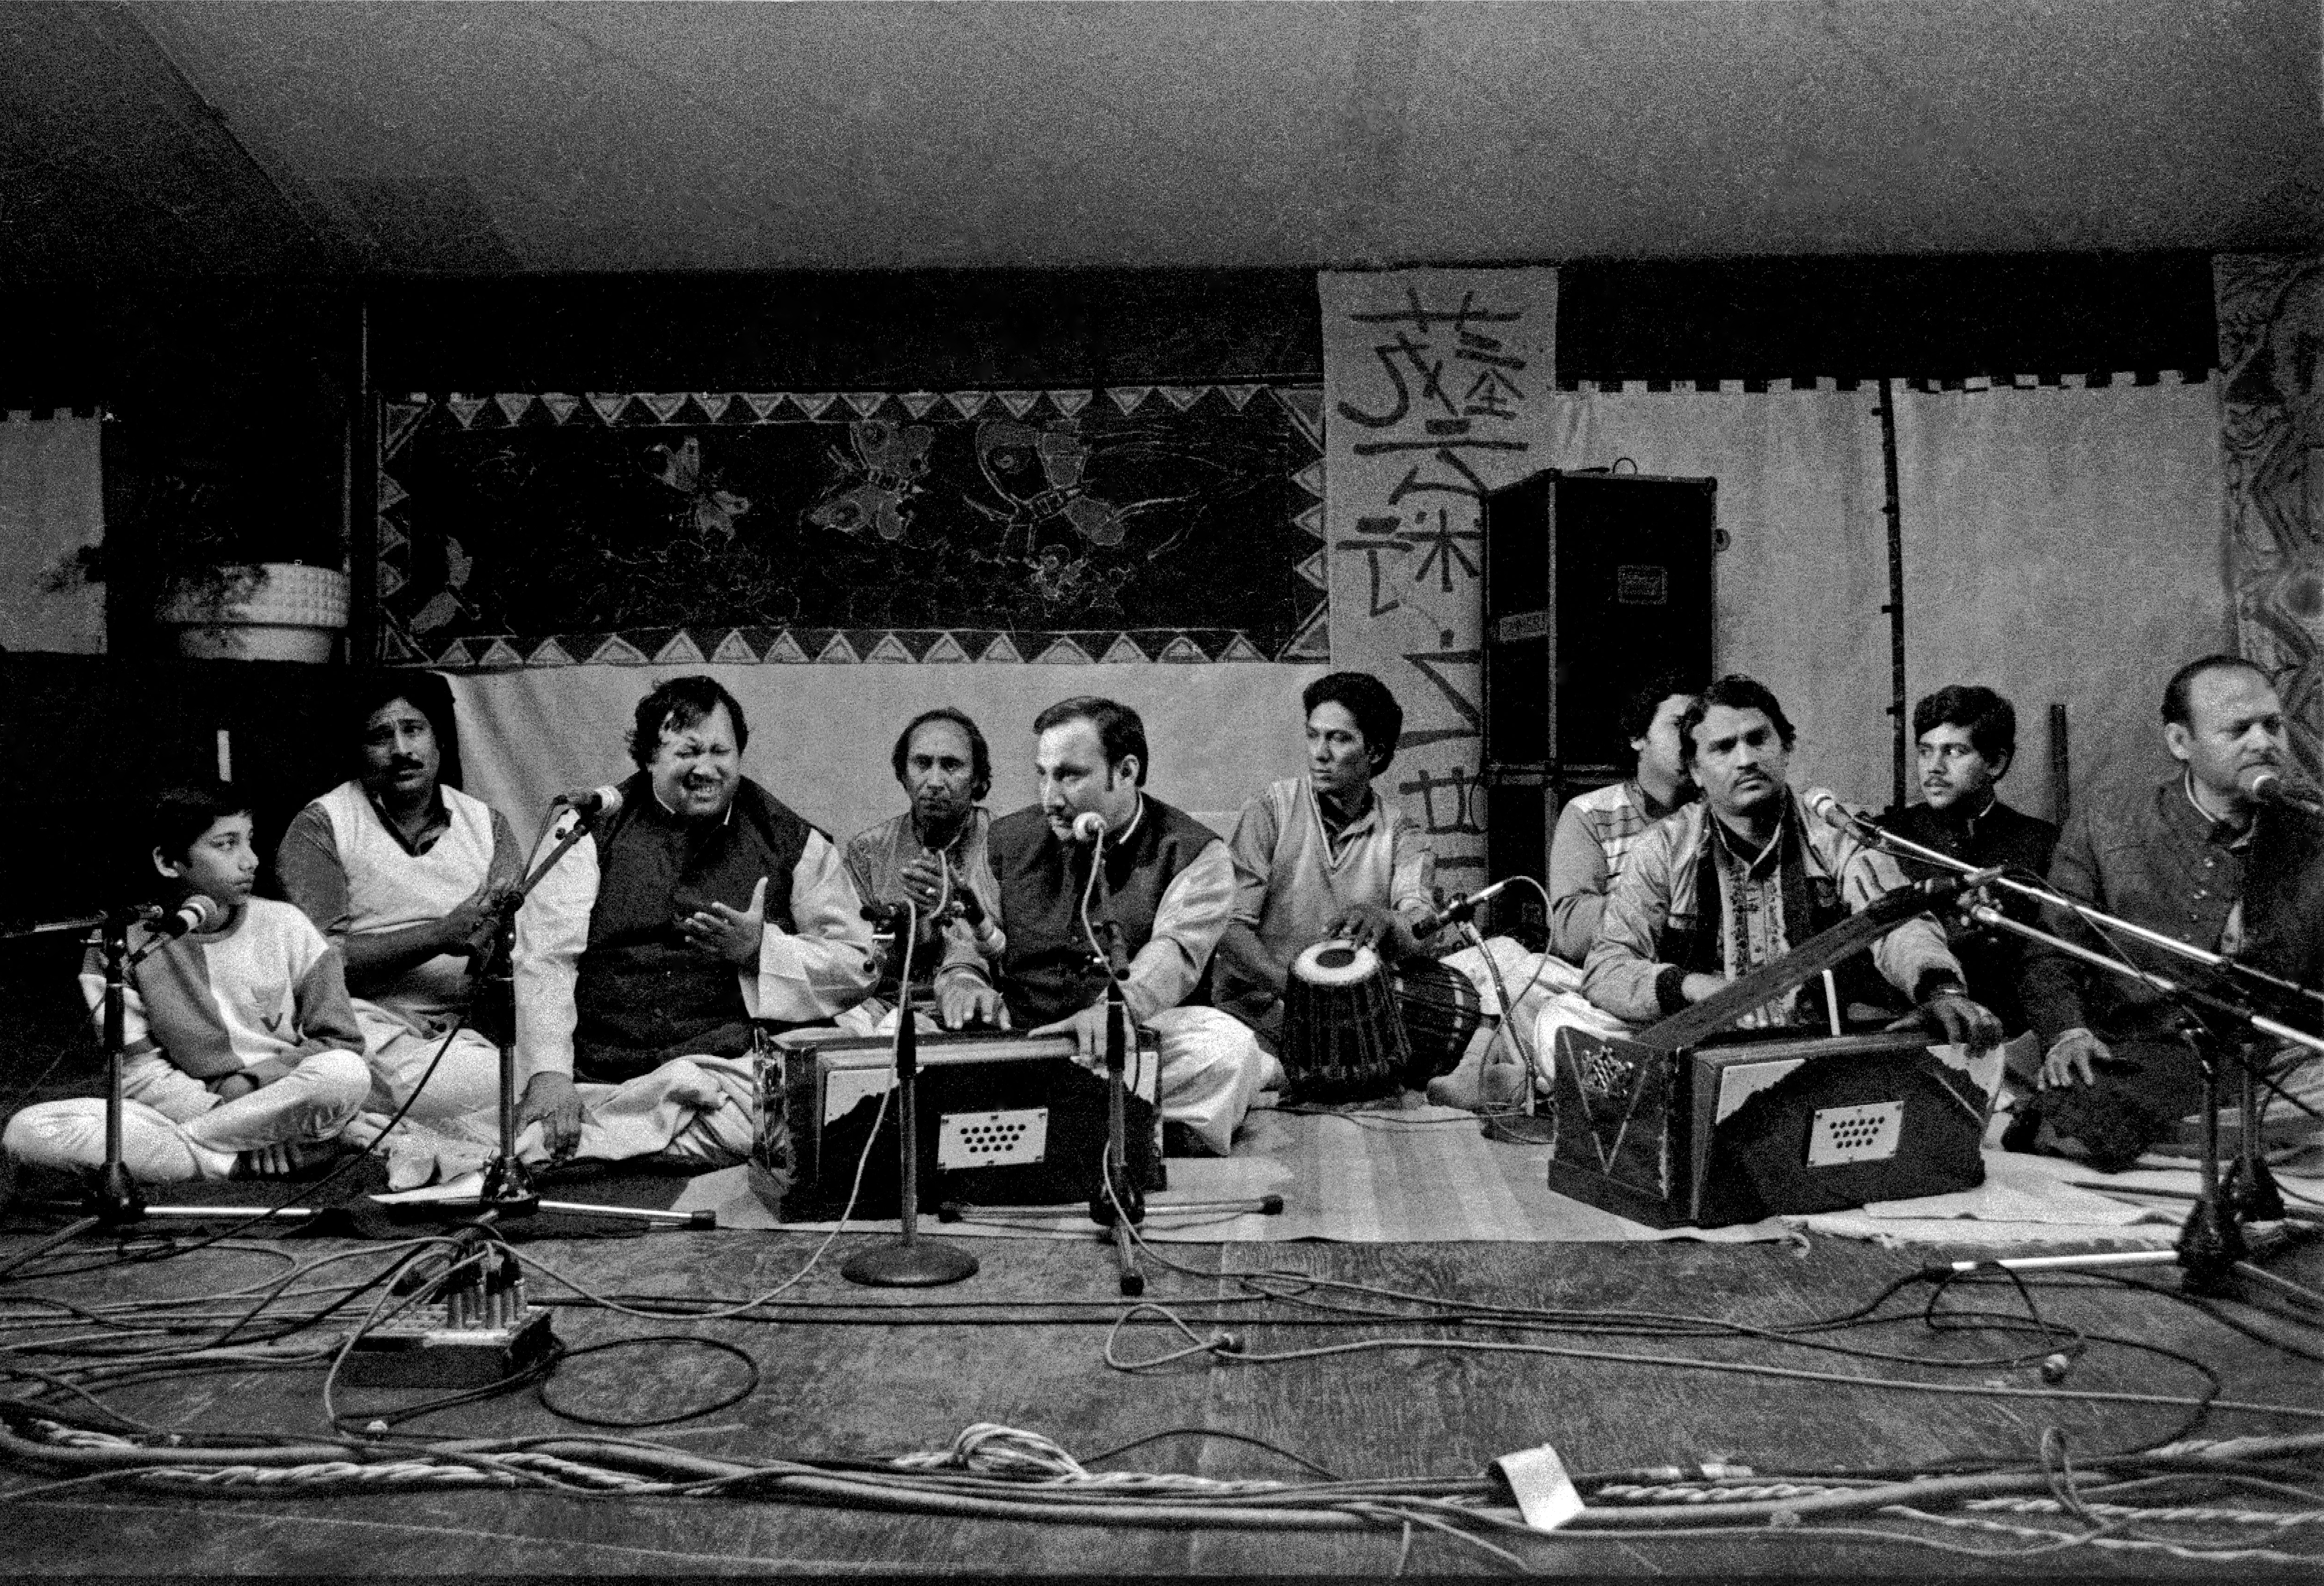 Nusrat Fateh Ali Khan & Party - Live at WOMAD 1985